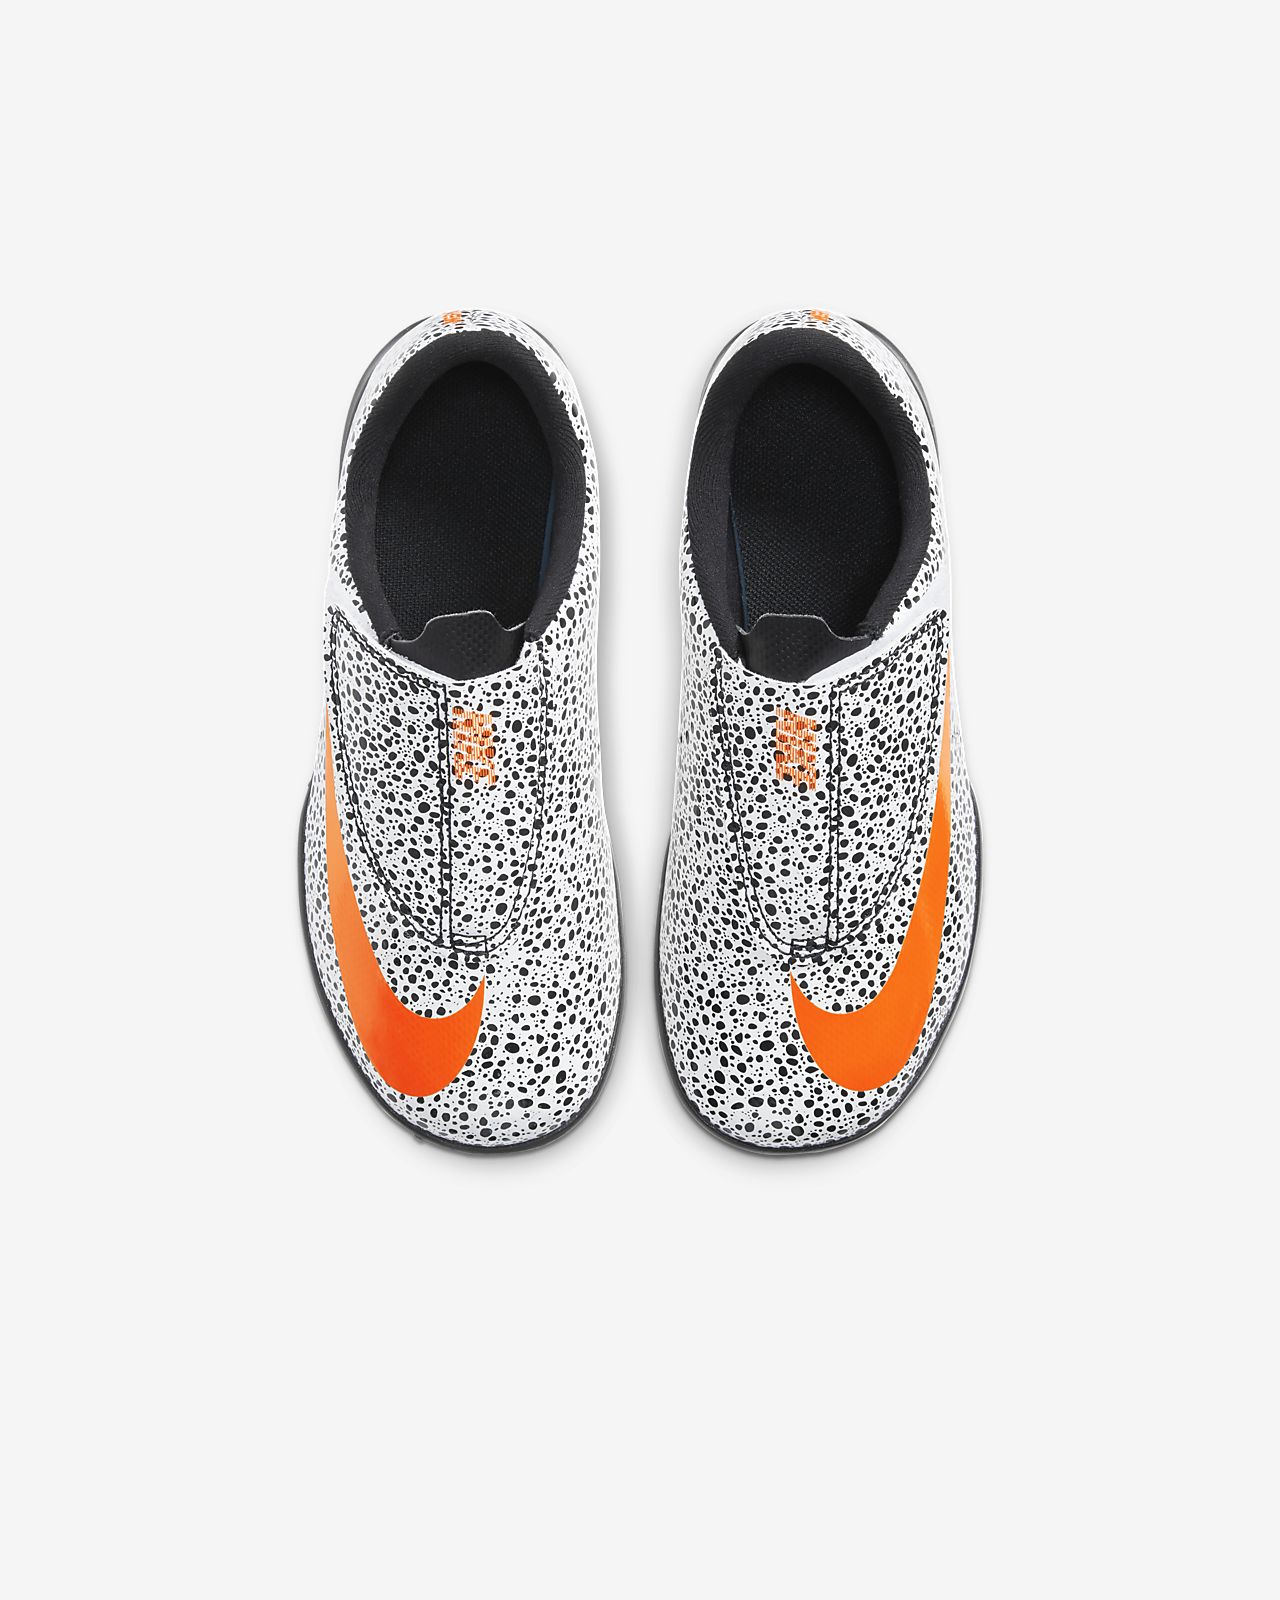 Nike Mercurial Superfly V FG Soccer Cleats CR7 Cool Gray .